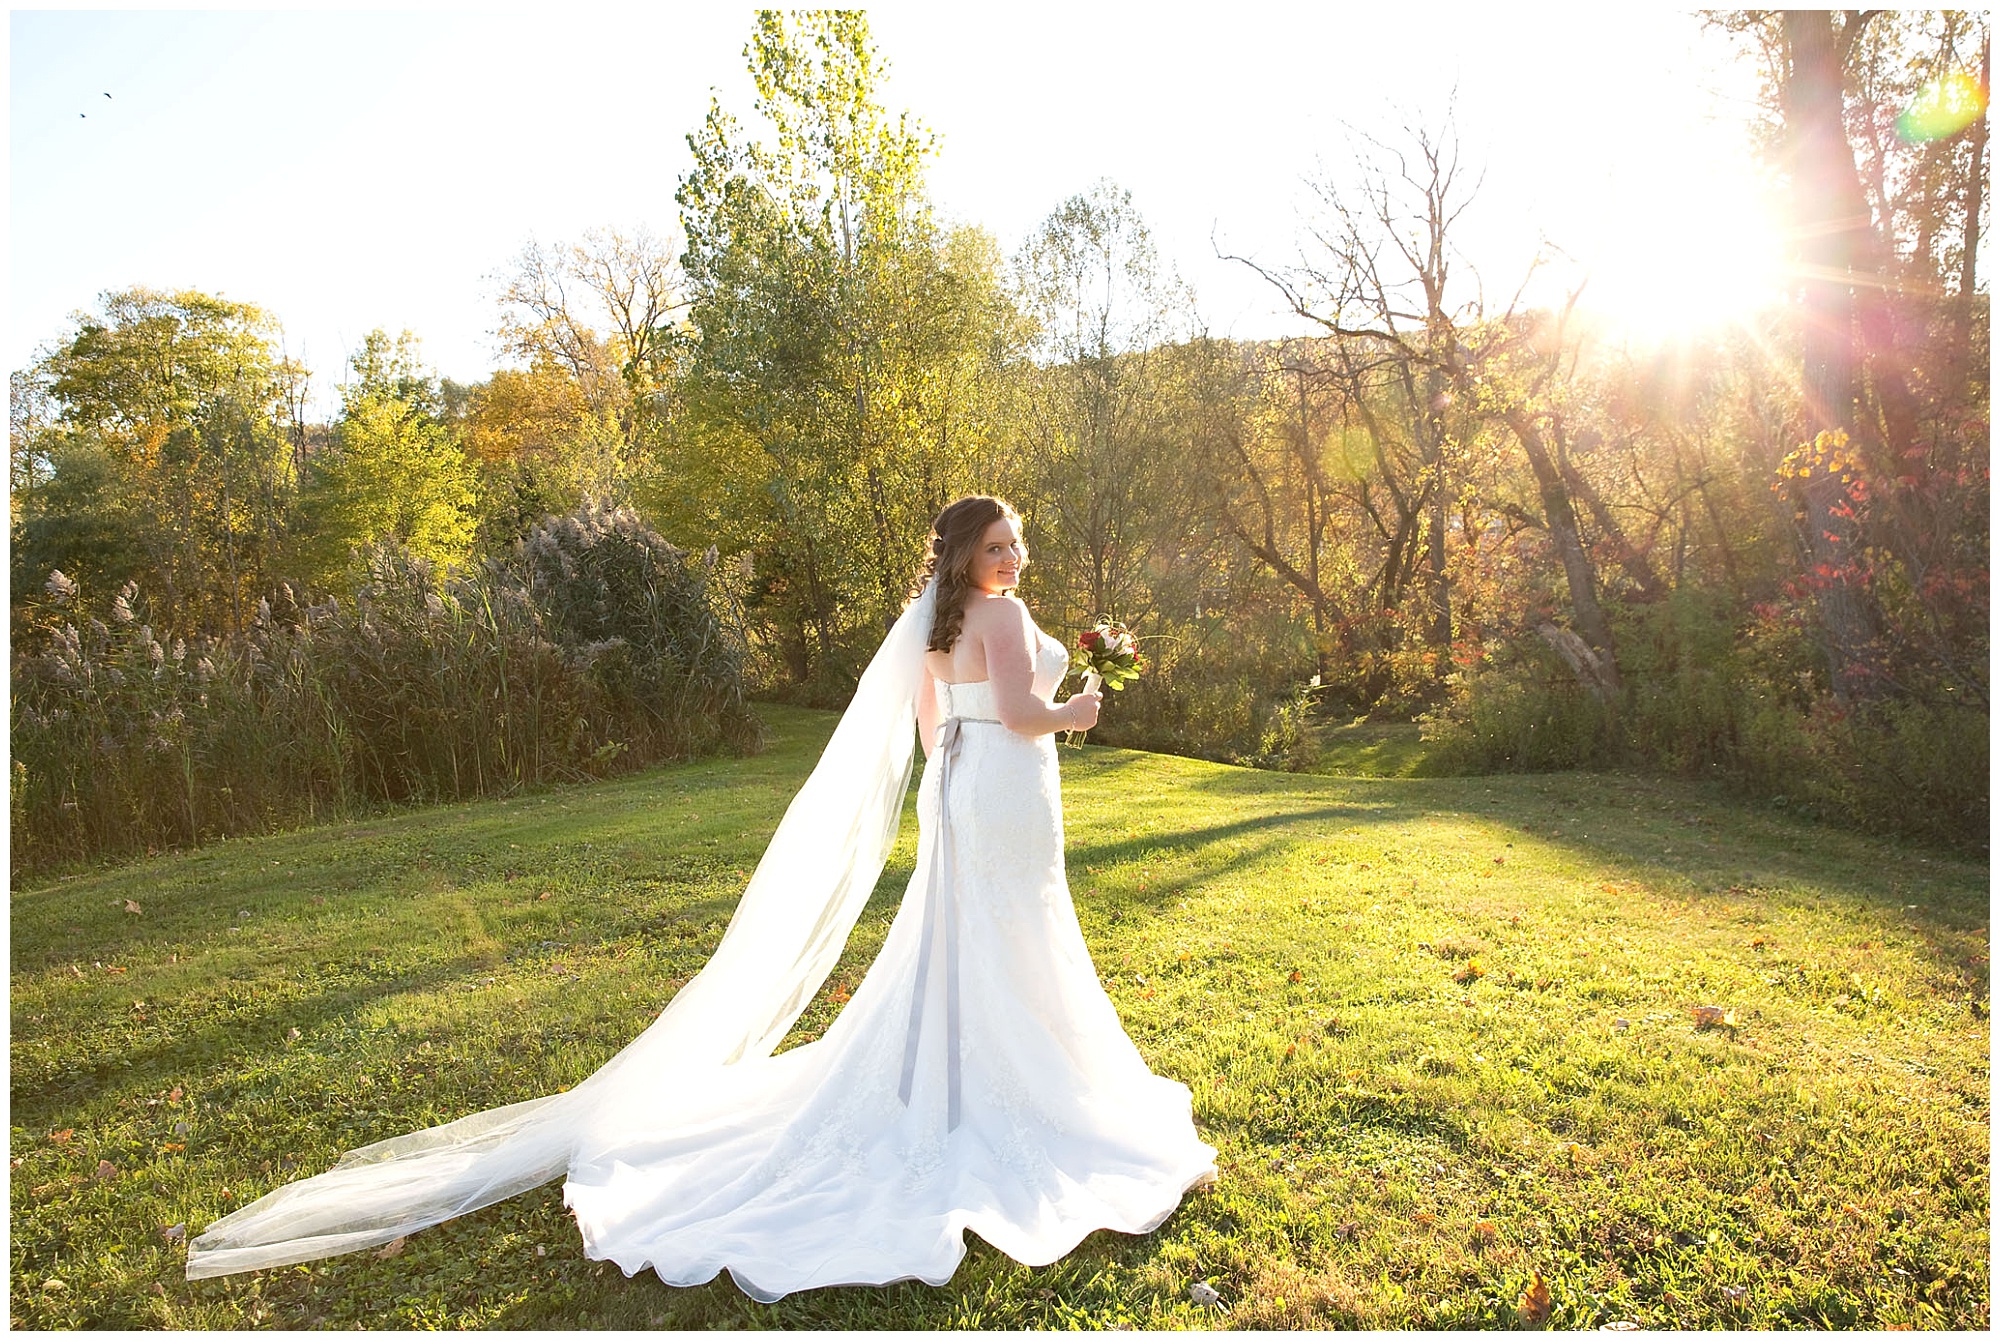 A bride portriat with her looking over her shoulder at the camera backlighted by the late autumn afternoon sunlight.